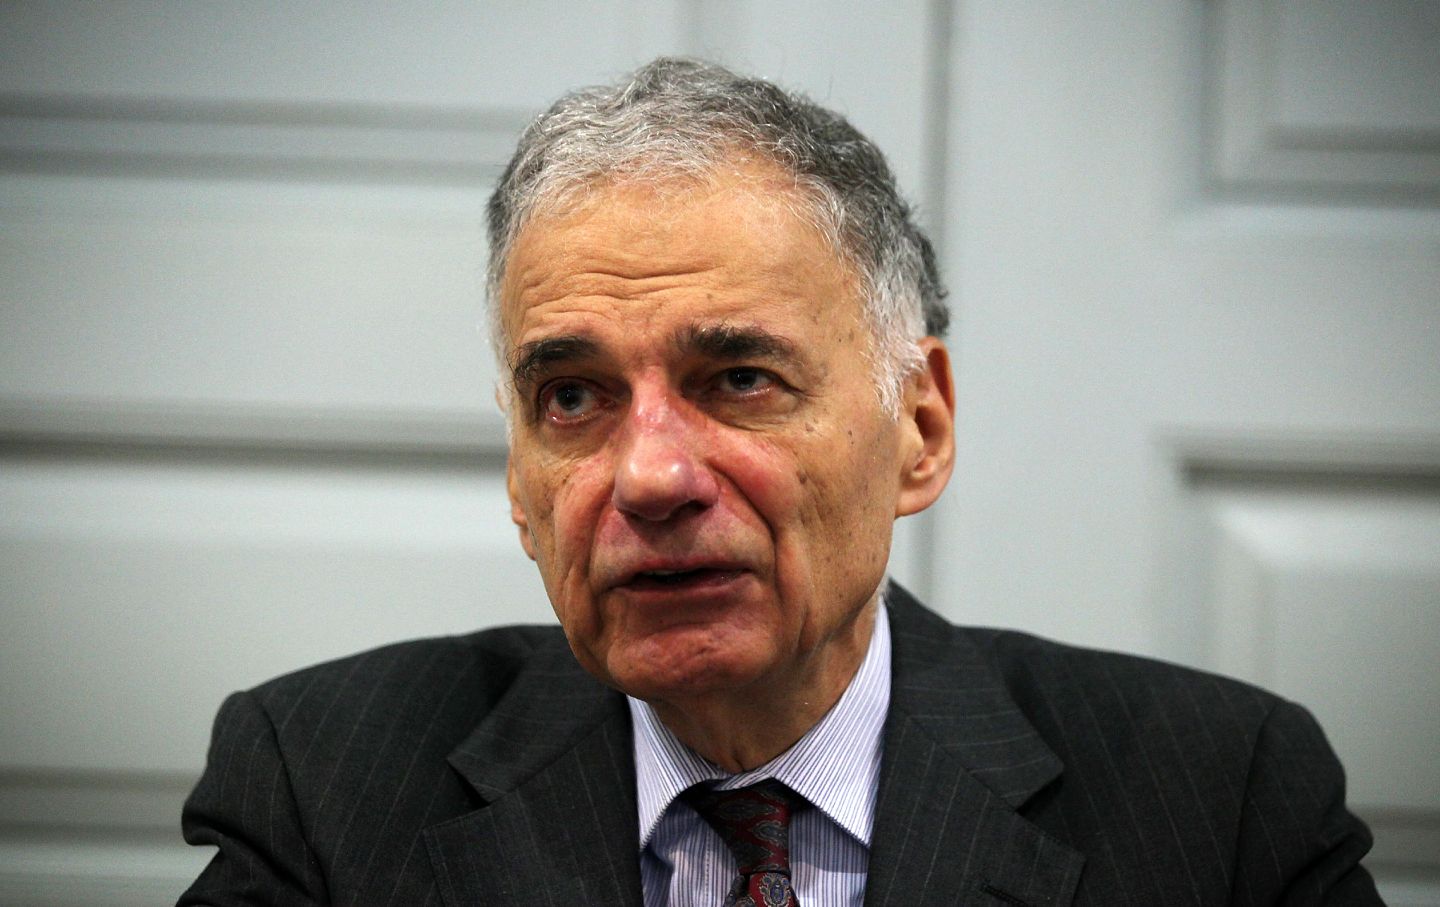 Former presidential candidate Ralph Nader speaks during a news conference July 2, 2012, at Public Citizen in Washington, D.C. Nader held a news conference to announce an “upcoming limited general strike to protest the colonial status of the District of Columbia and to support D.C. statehood.”